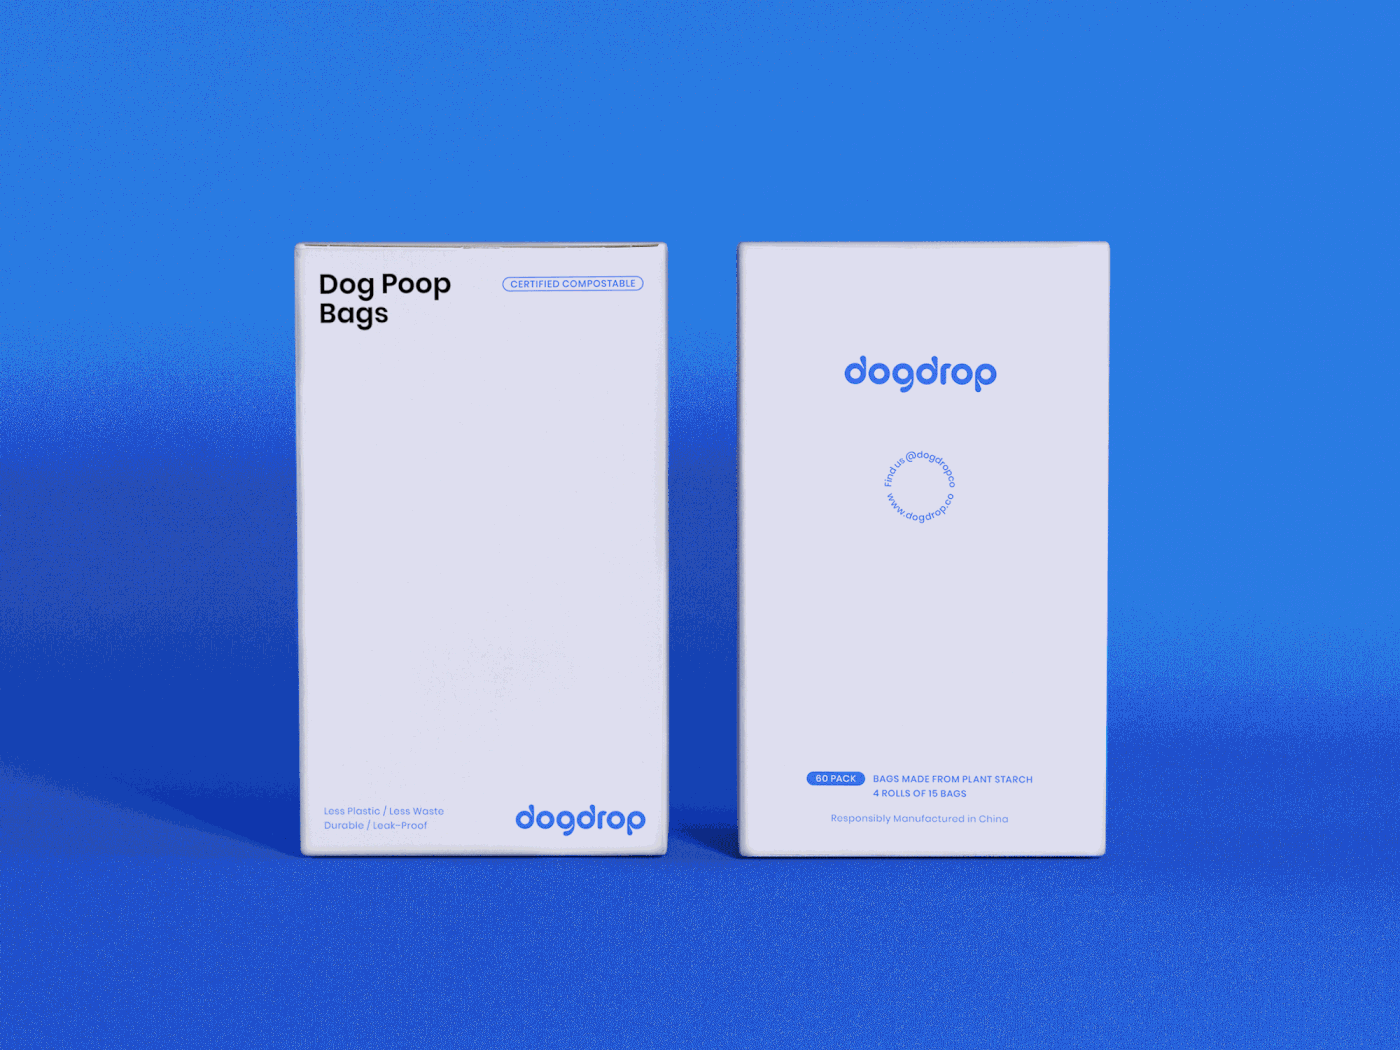 Packaging example #715: The Dogdrop's Packaging